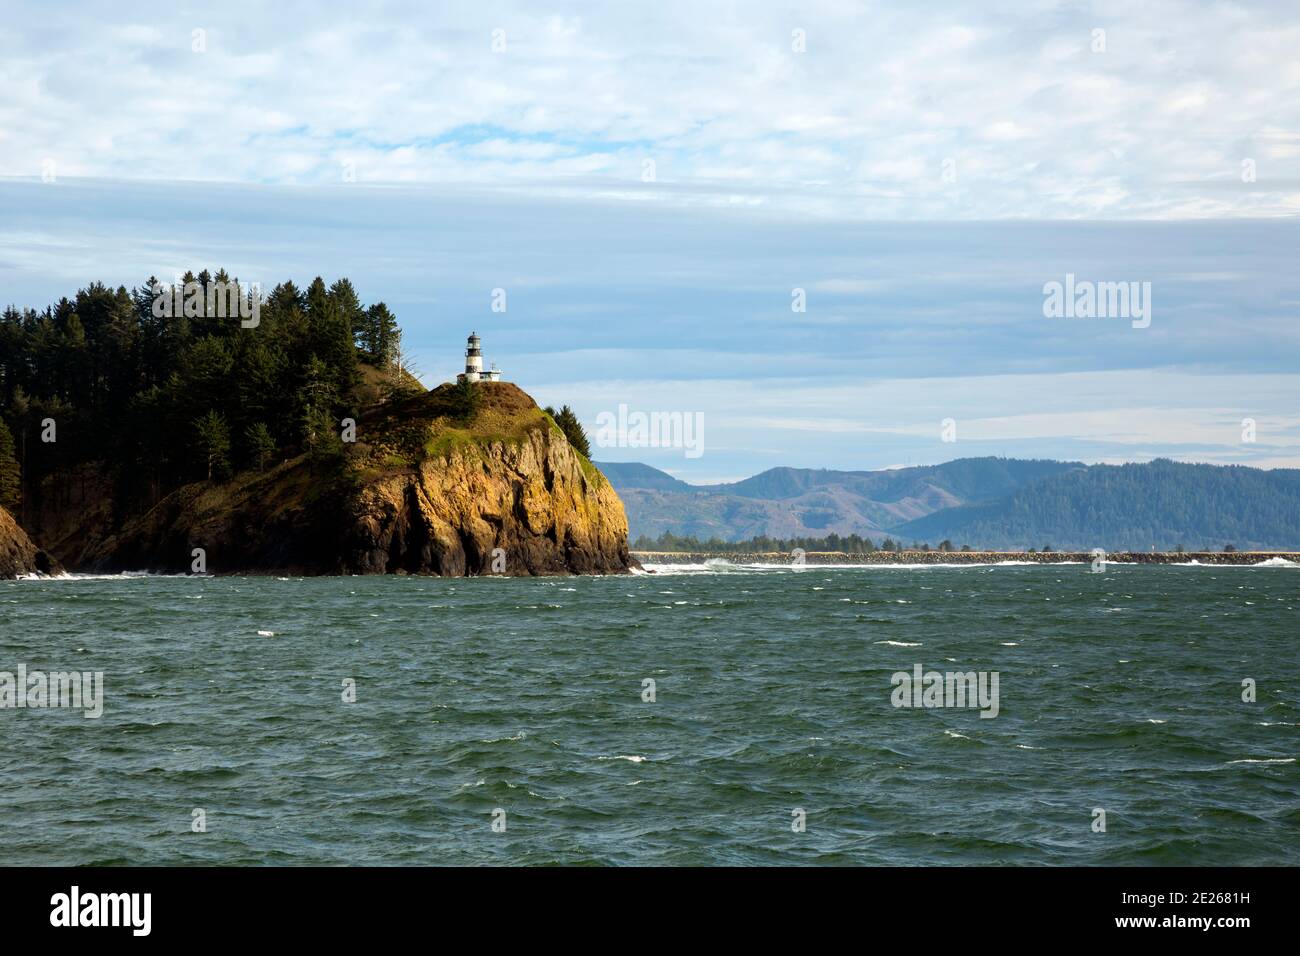 WA19082-00...WASHINGTON - Cape Disappointment Lighthouse mit Blick auf den Columbia River im Cape Disappointment State Park. Stockfoto